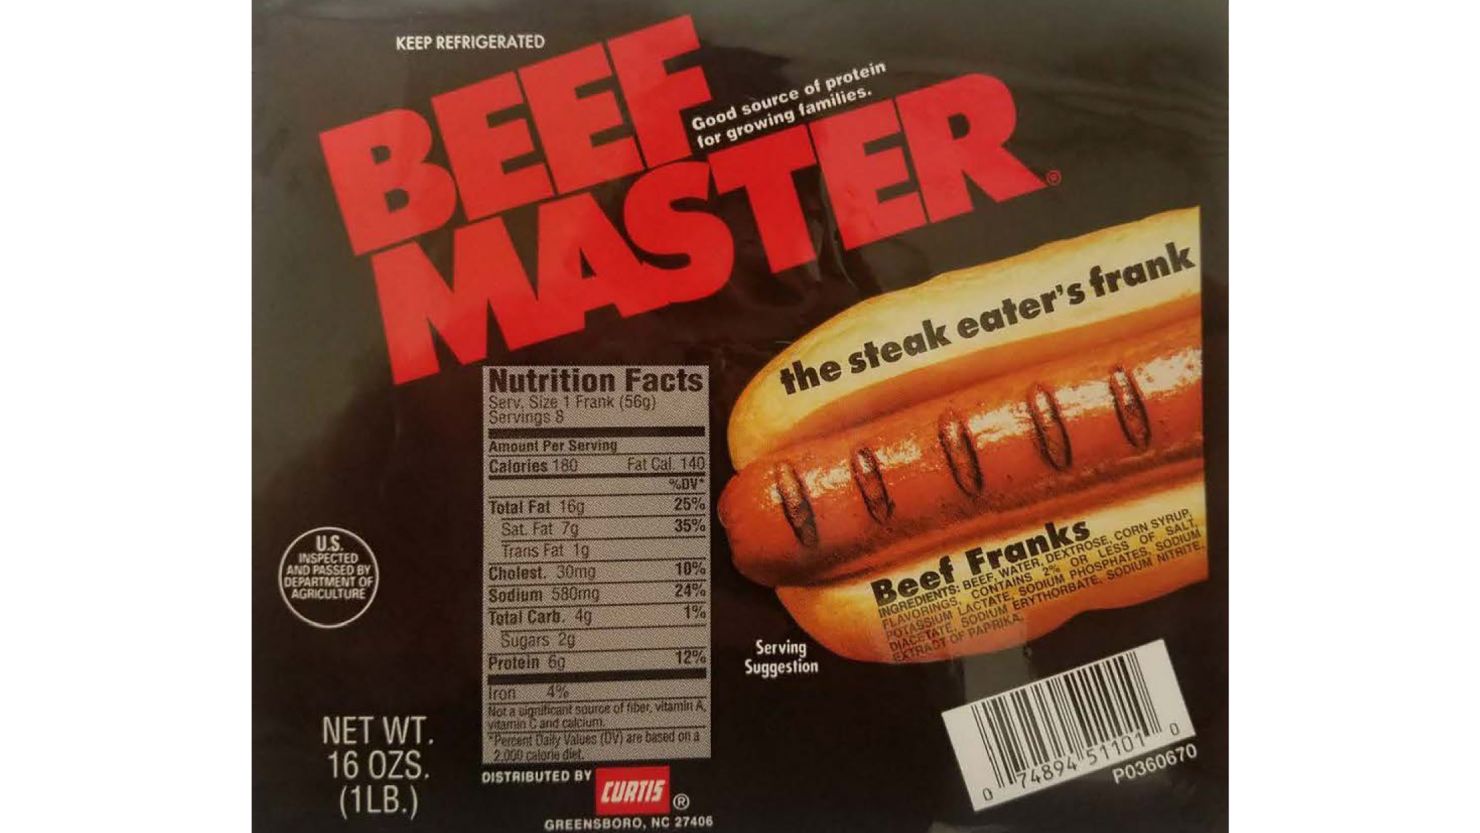 Curtis Beef Master franks are among the 210,606 pounds of hot dogs being recalled.